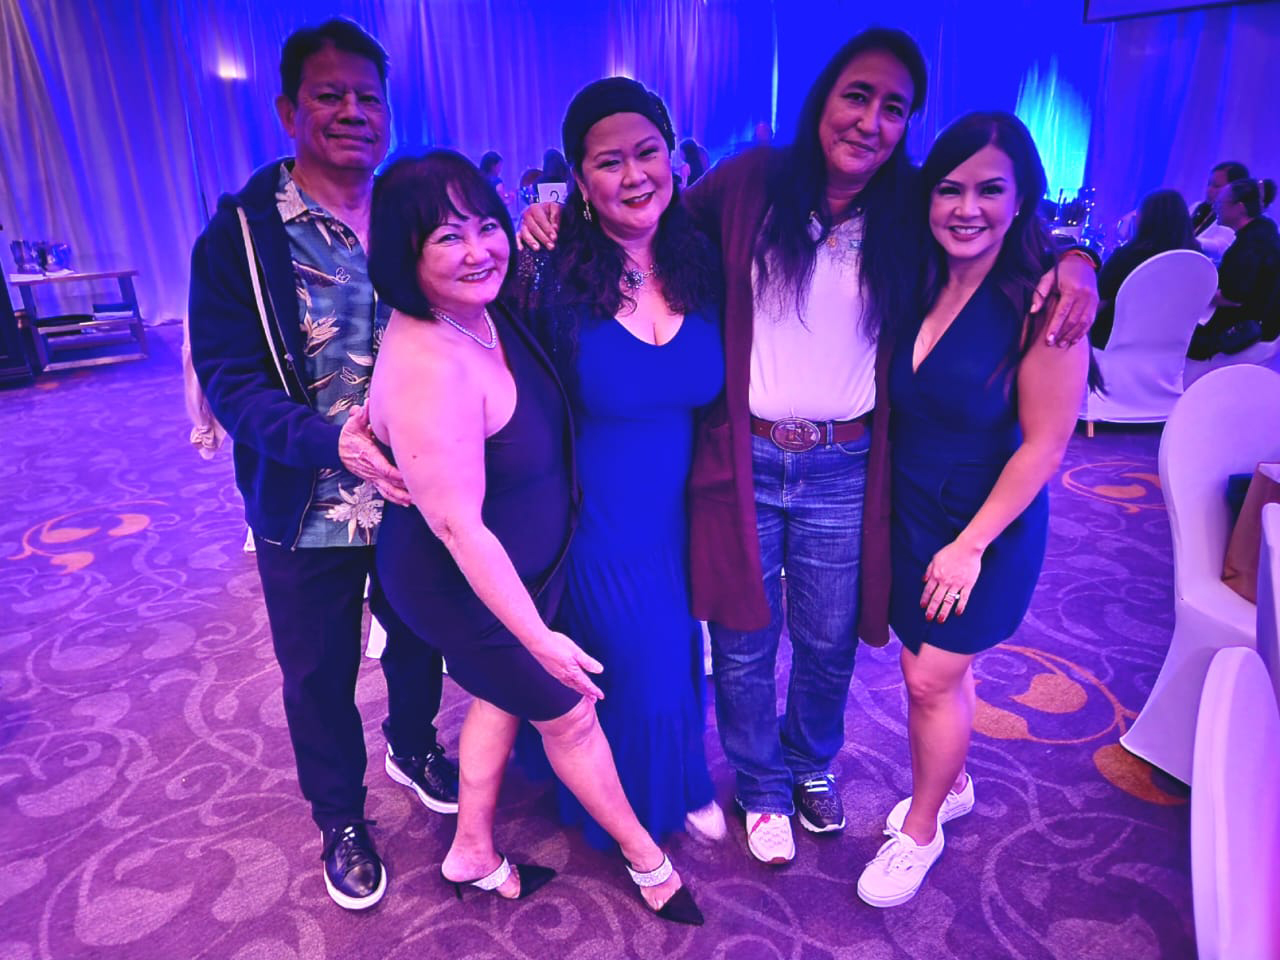 (From left) John P. Duenas, principal broker, Remax Diamond Realty;, Elizabeth Duenas, associate broker and realtor of Remax Diamond Realty, regional director for Remax Micronesia and the Philippines, and 2022 president of Guam Association of Realtors; Peggy A. Llagas, CEO, Guam Association of Realtors; Nenita B. Muna, owner of White House Realty, and 2024 president-elect of Guam Association of Realtors; and Coleen Blas, realtor, Remax Diamond Realty. 